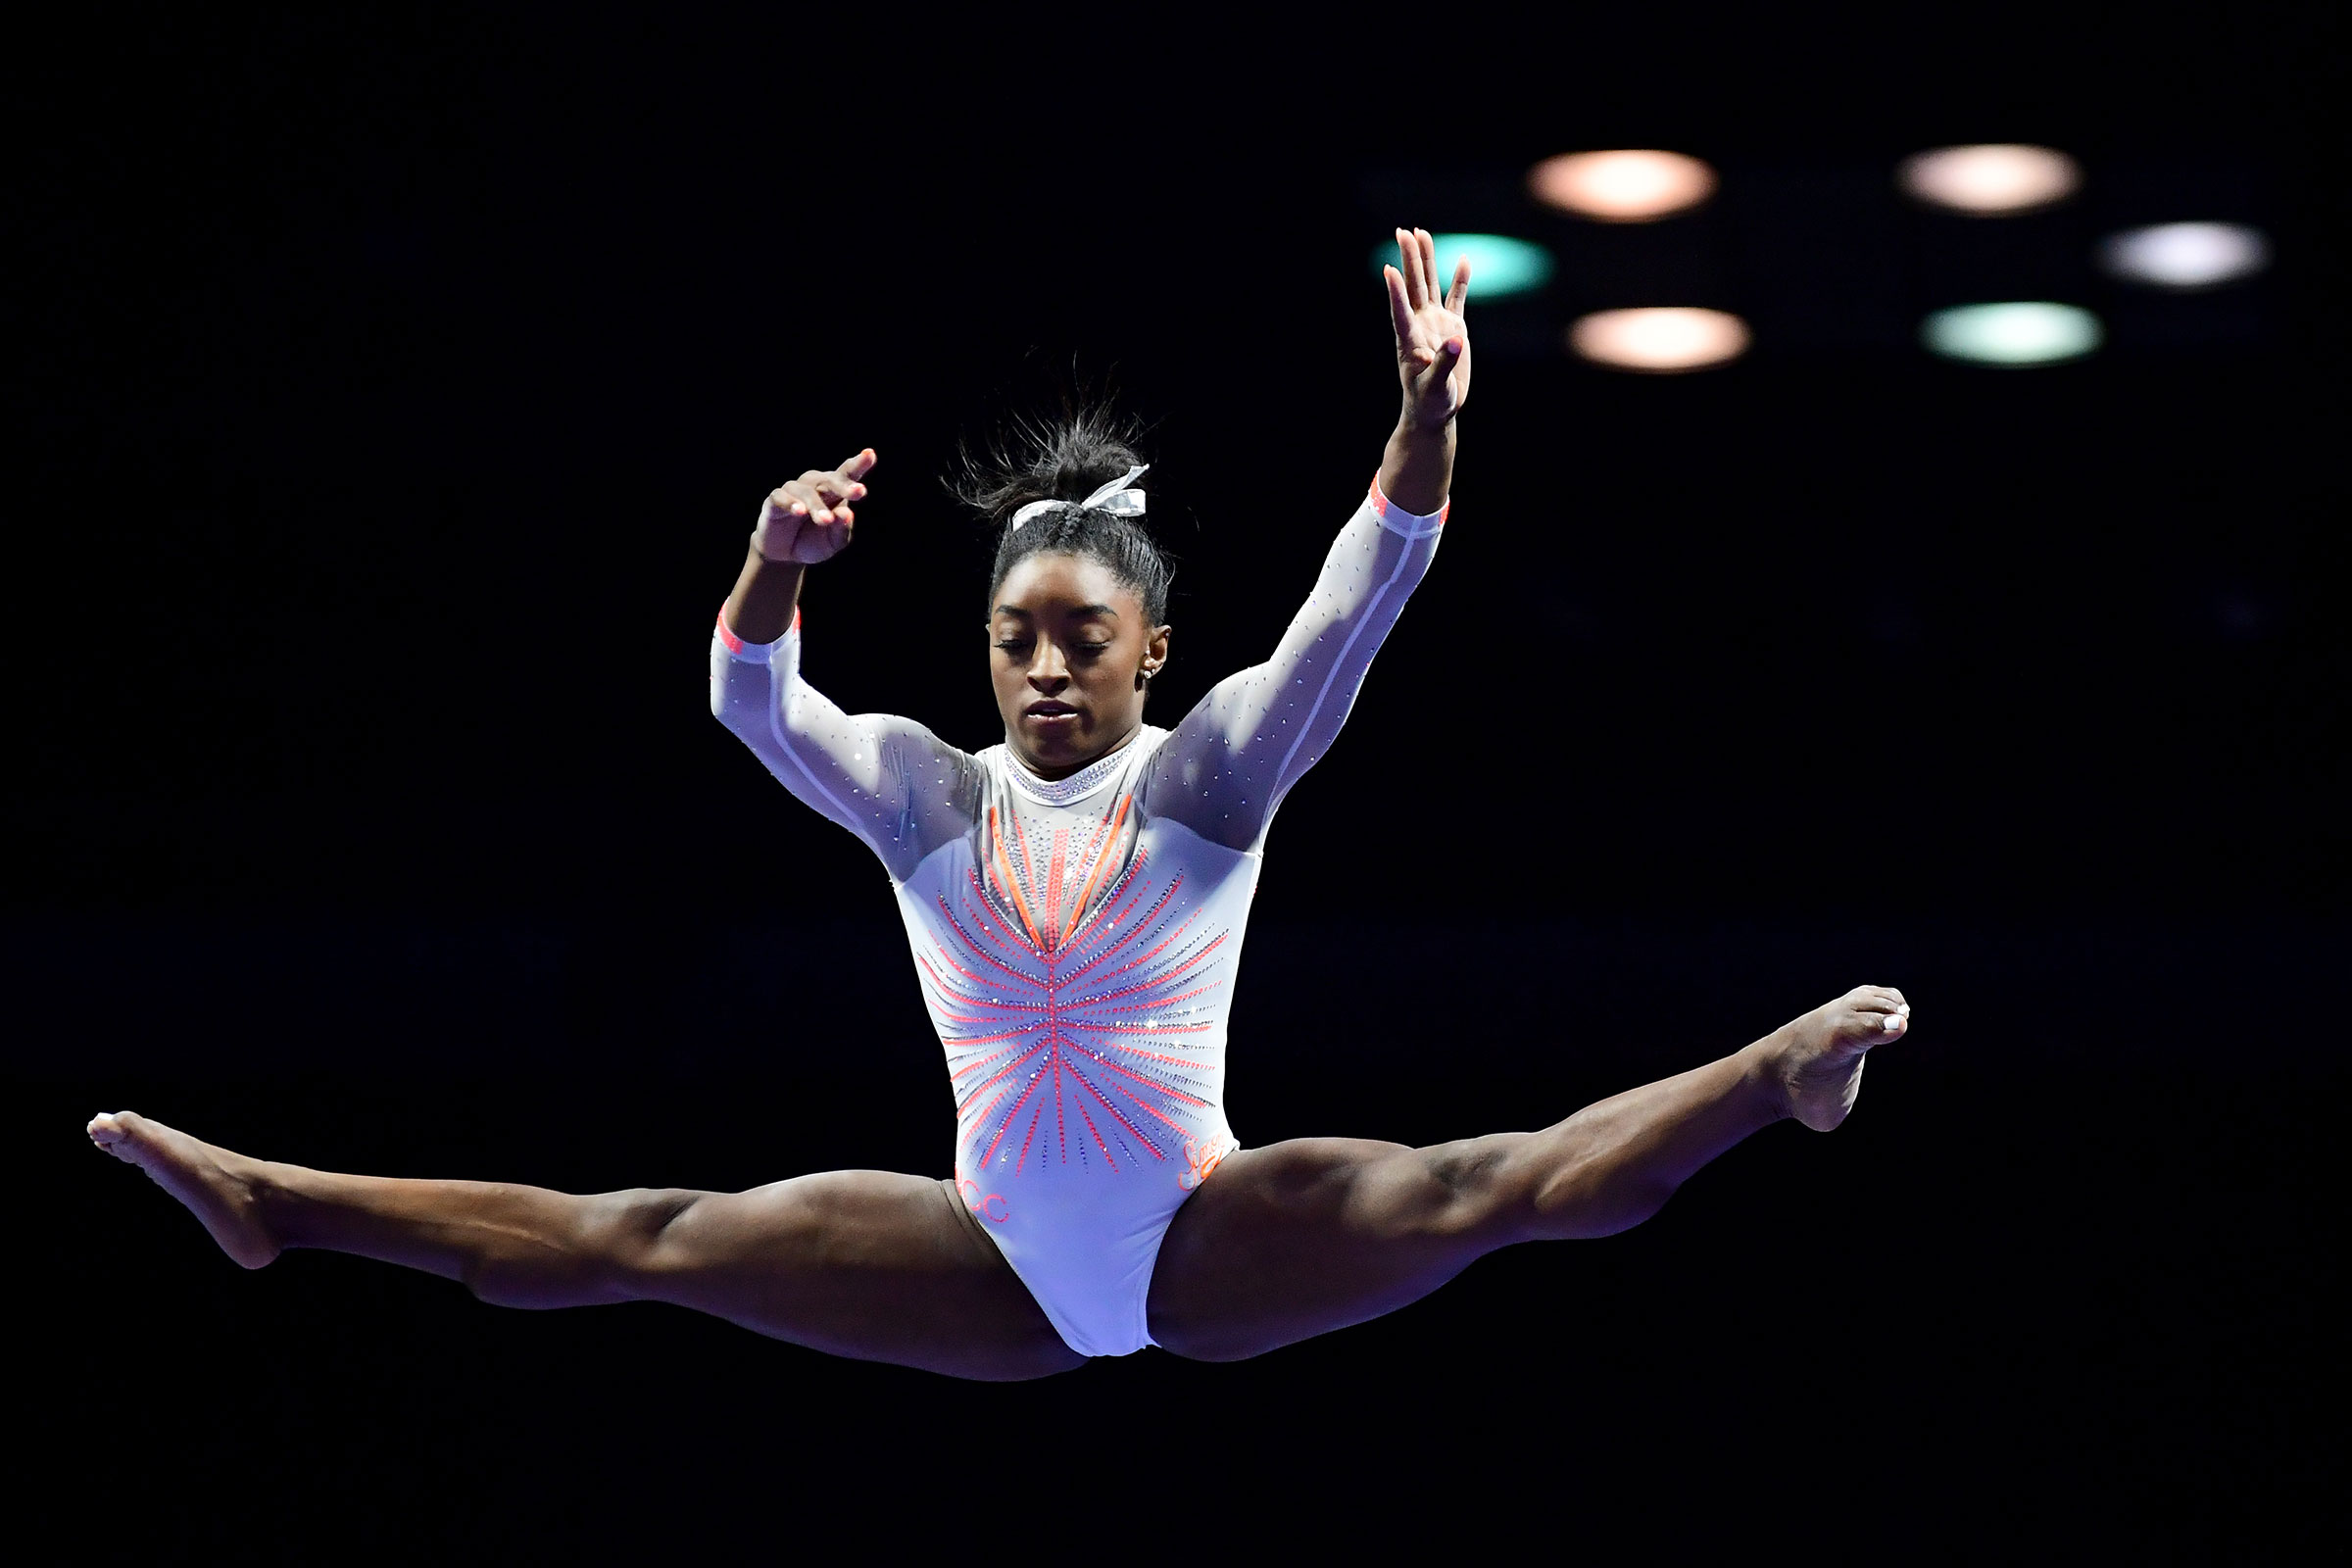 Simone Biles competes on the beam during the 2021 GK U.S. Classic gymnastics competition on May 22, 2021 in Indianapolis, Indiana. (Emilee Chinn—Getty Images)